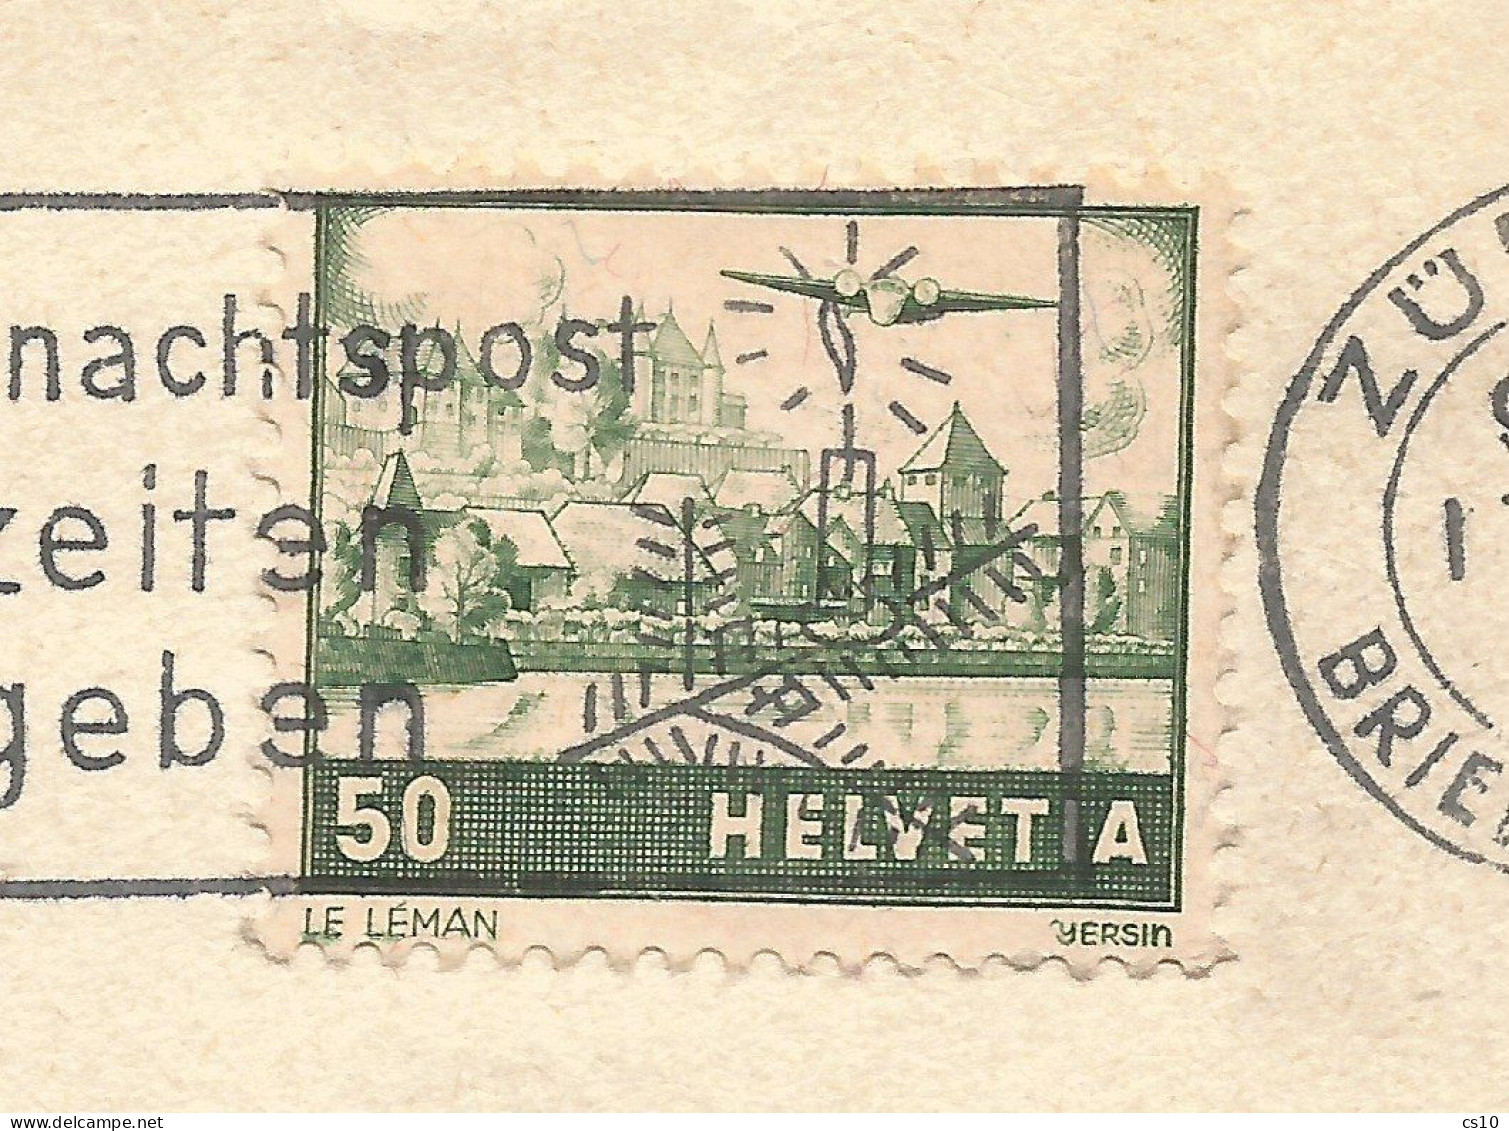 Suisse 1941 Airmail C.50 Green Variety "Weisses Dach" "White Roof" #29a Solo Franking Commerce AirCv To Milano 17dec1946 - Abarten